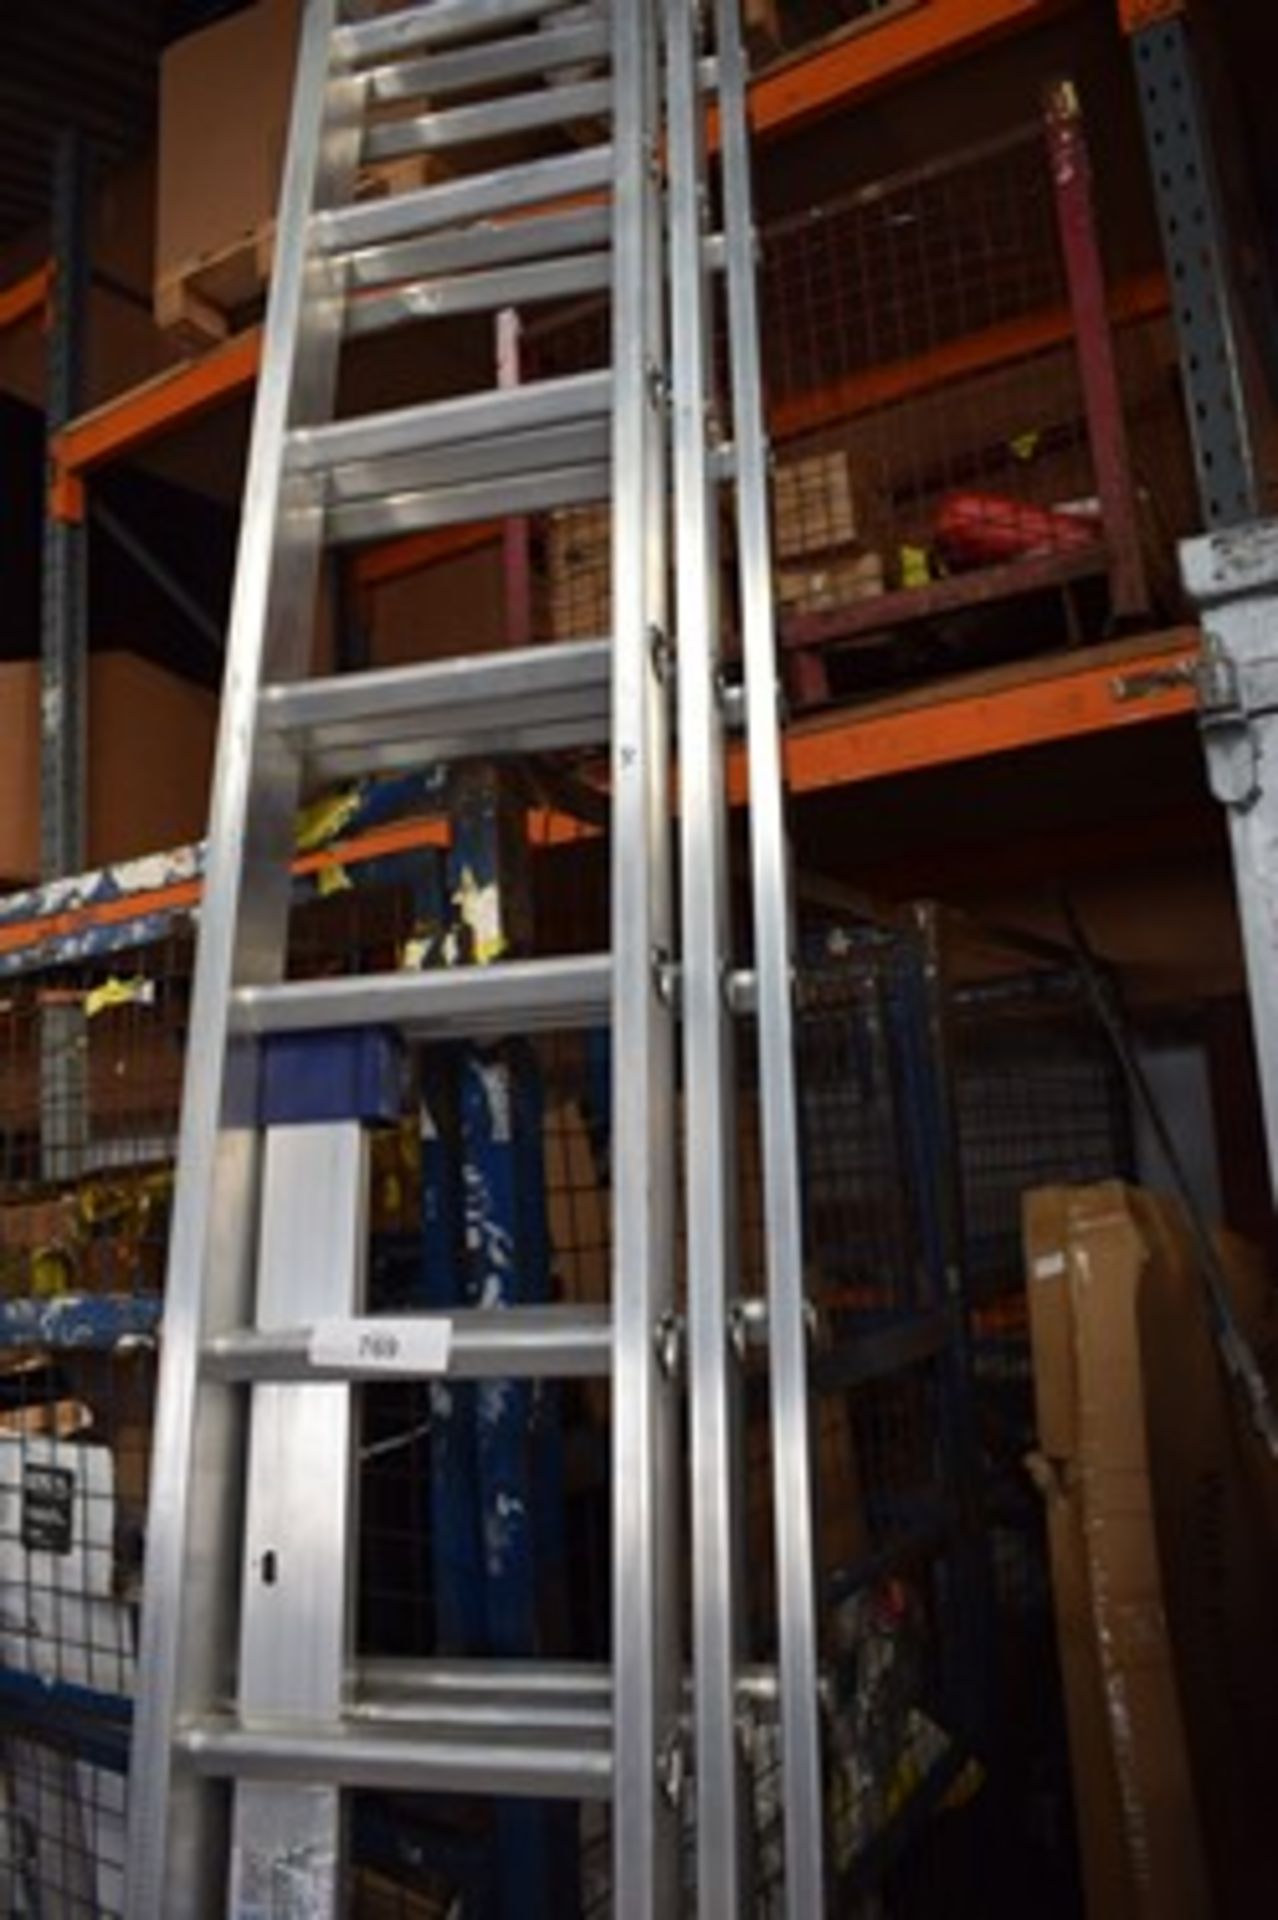 1 x TB Davies triple extending ladder (11 rung x 3 section) - New (SW) - Image 2 of 2